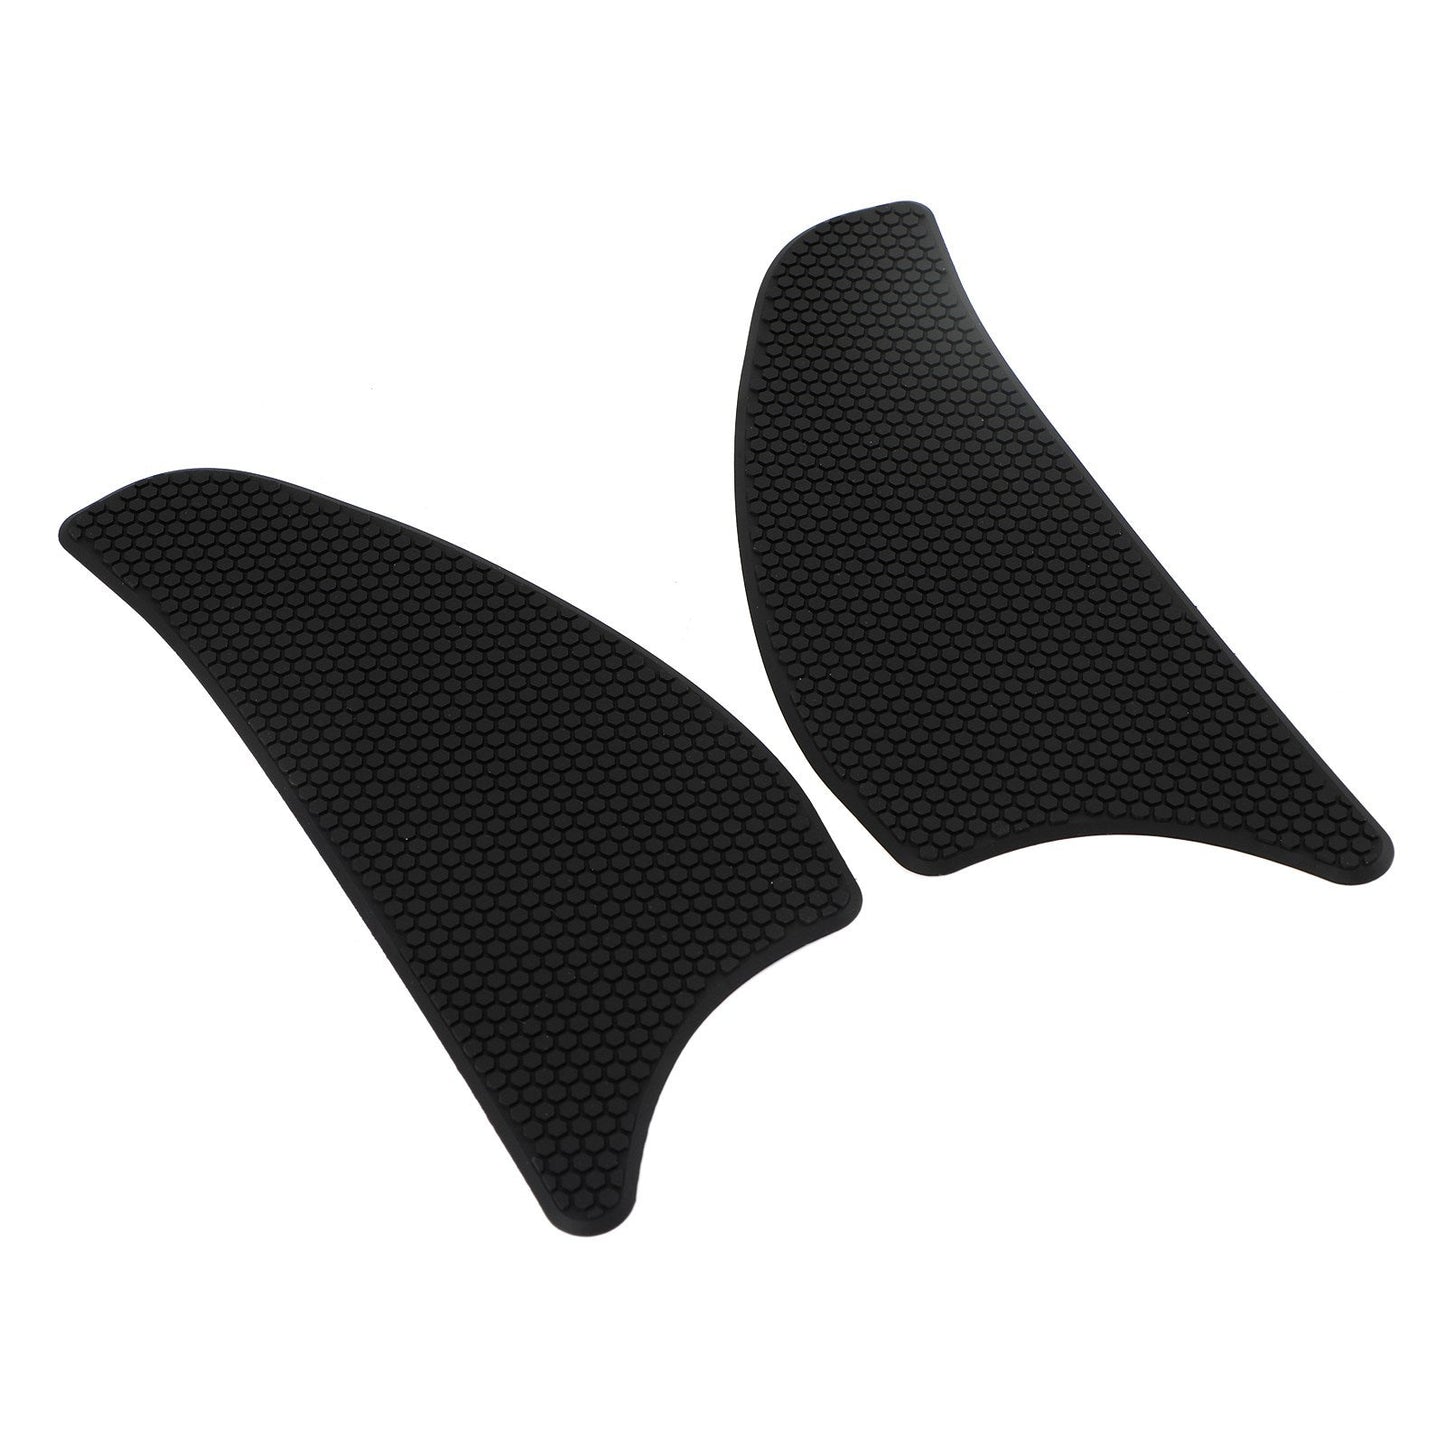 Tank Pad Traction Grip Protector 2-Piece Kit Fit for Kawasaki Versys 1000 15-19